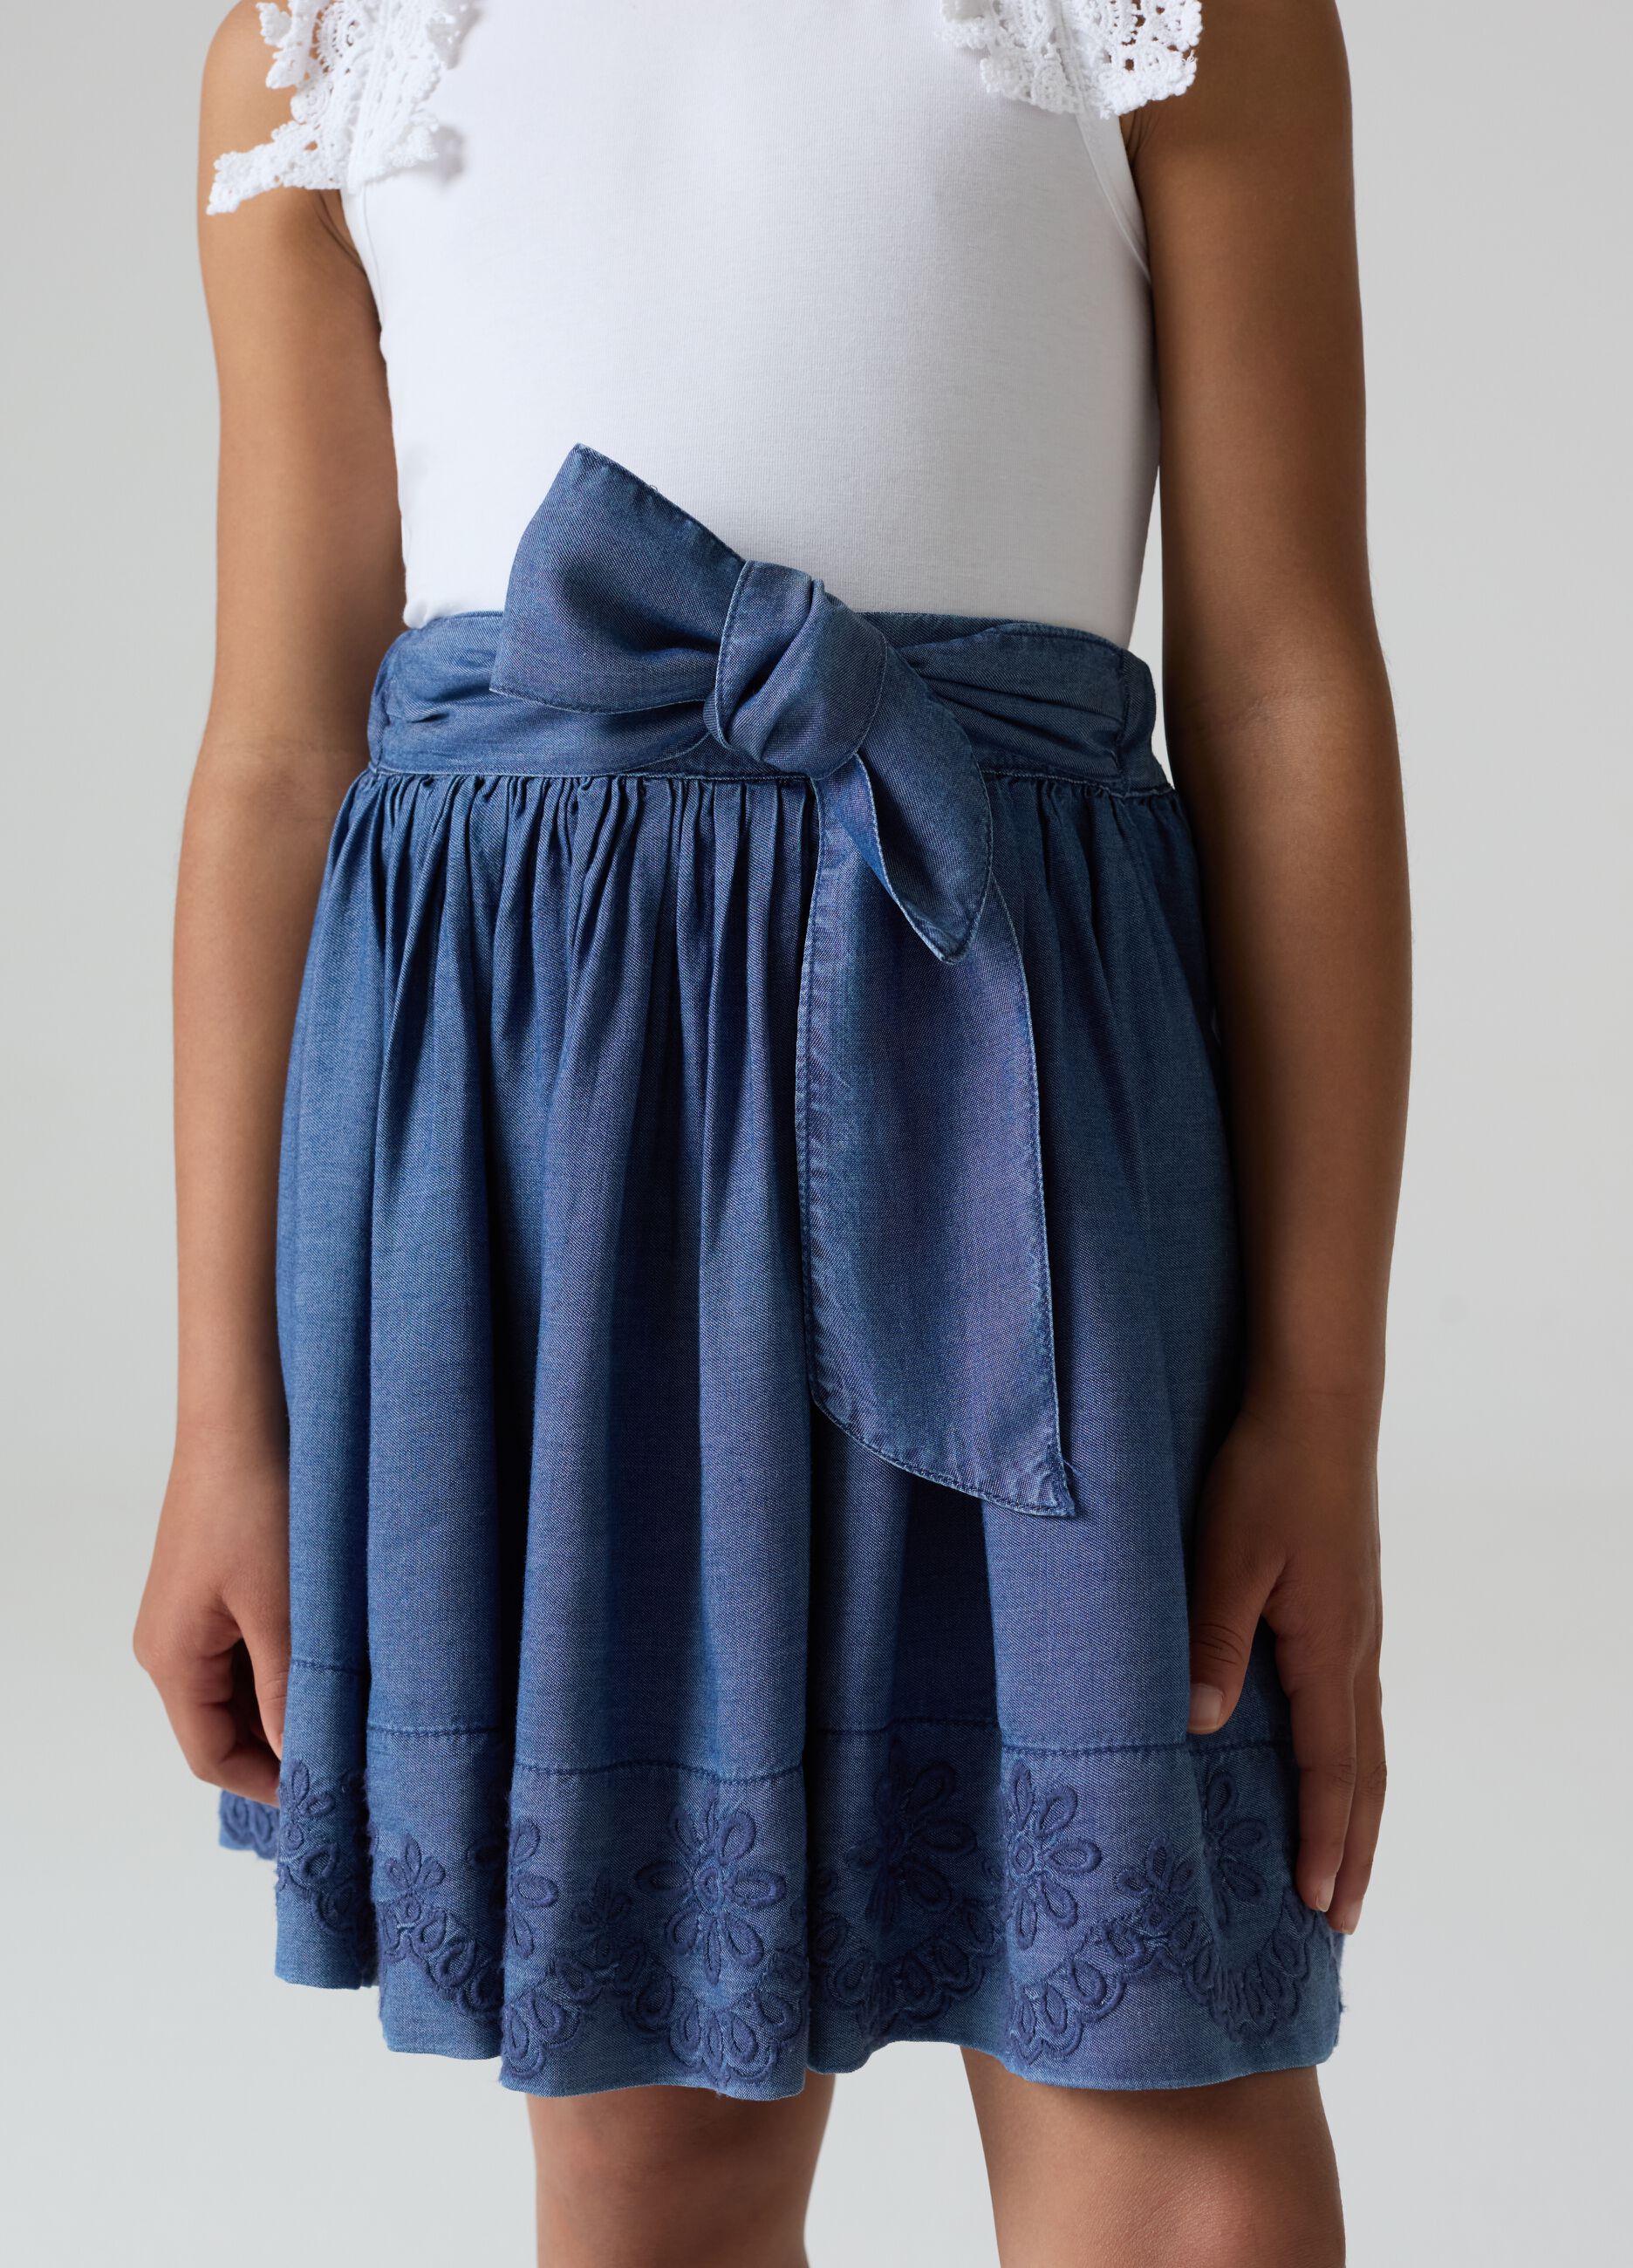 Skirt in TENCEL™ Lyocell with embroidery